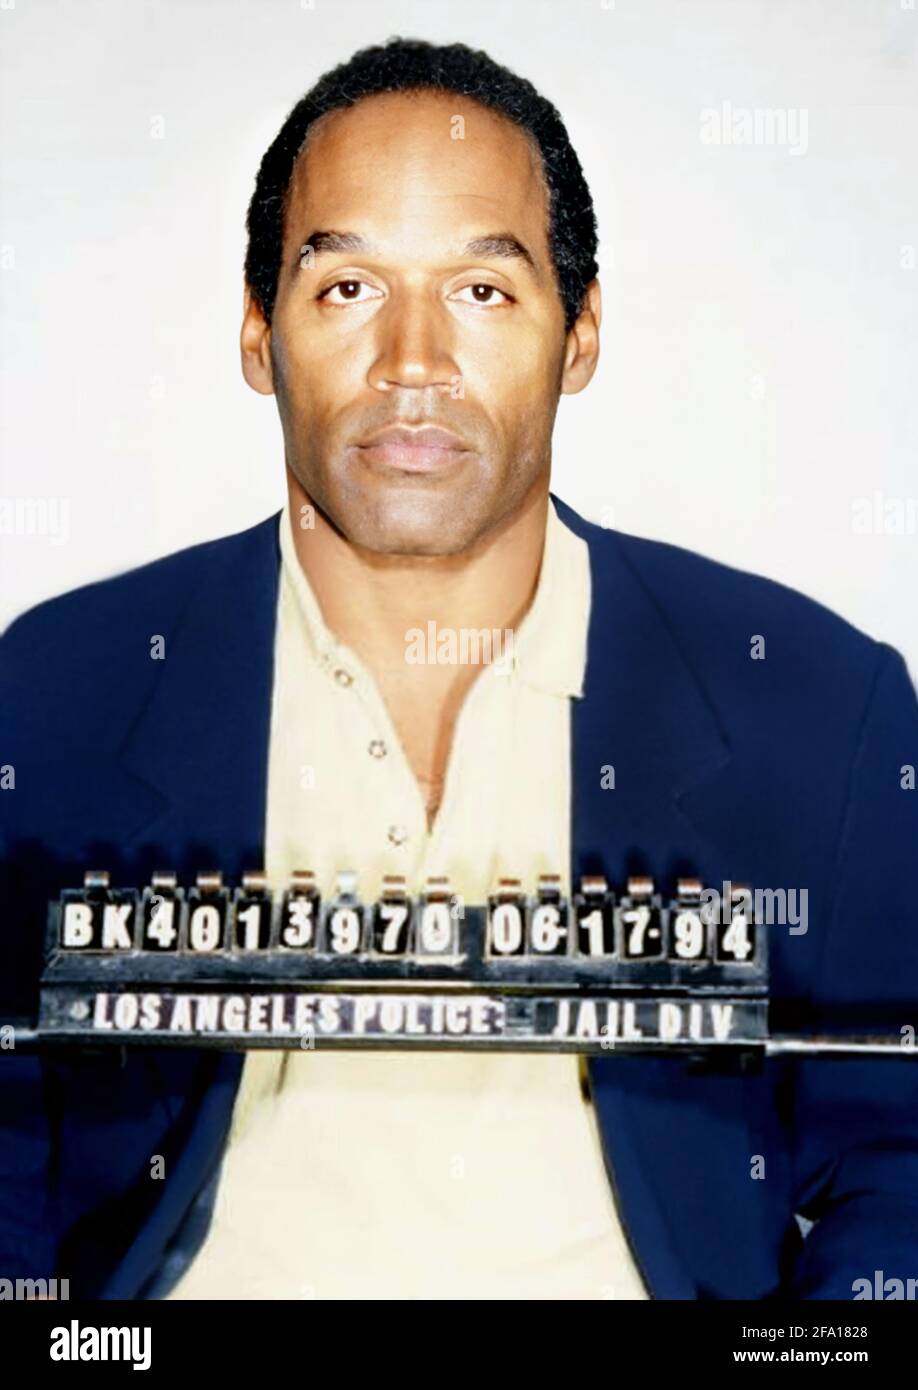 1994 , 17 june , Los Angeles , California , USA :The famous footbal player , actor and killer O.J. SIMPSON ( Orenthal James , born in San Francisco , 1947 ), MUG SHOT after the arrest at Los Angeles Police Department Jail Division . He is now best known for being tried for the murders of his former wife, Nicole Brown Simpson, and her friend, Ron Goldman. Simpson was acquitted of the murders in criminal court, but was later found responsible for both deaths in a civil trial . Unknown photographer . - MUGSHOT - Mug-Shot - OUTLAWS - KILLER - ASSASSINO - delinquente - criminalità - UXORICIDA - CRO Stock Photo